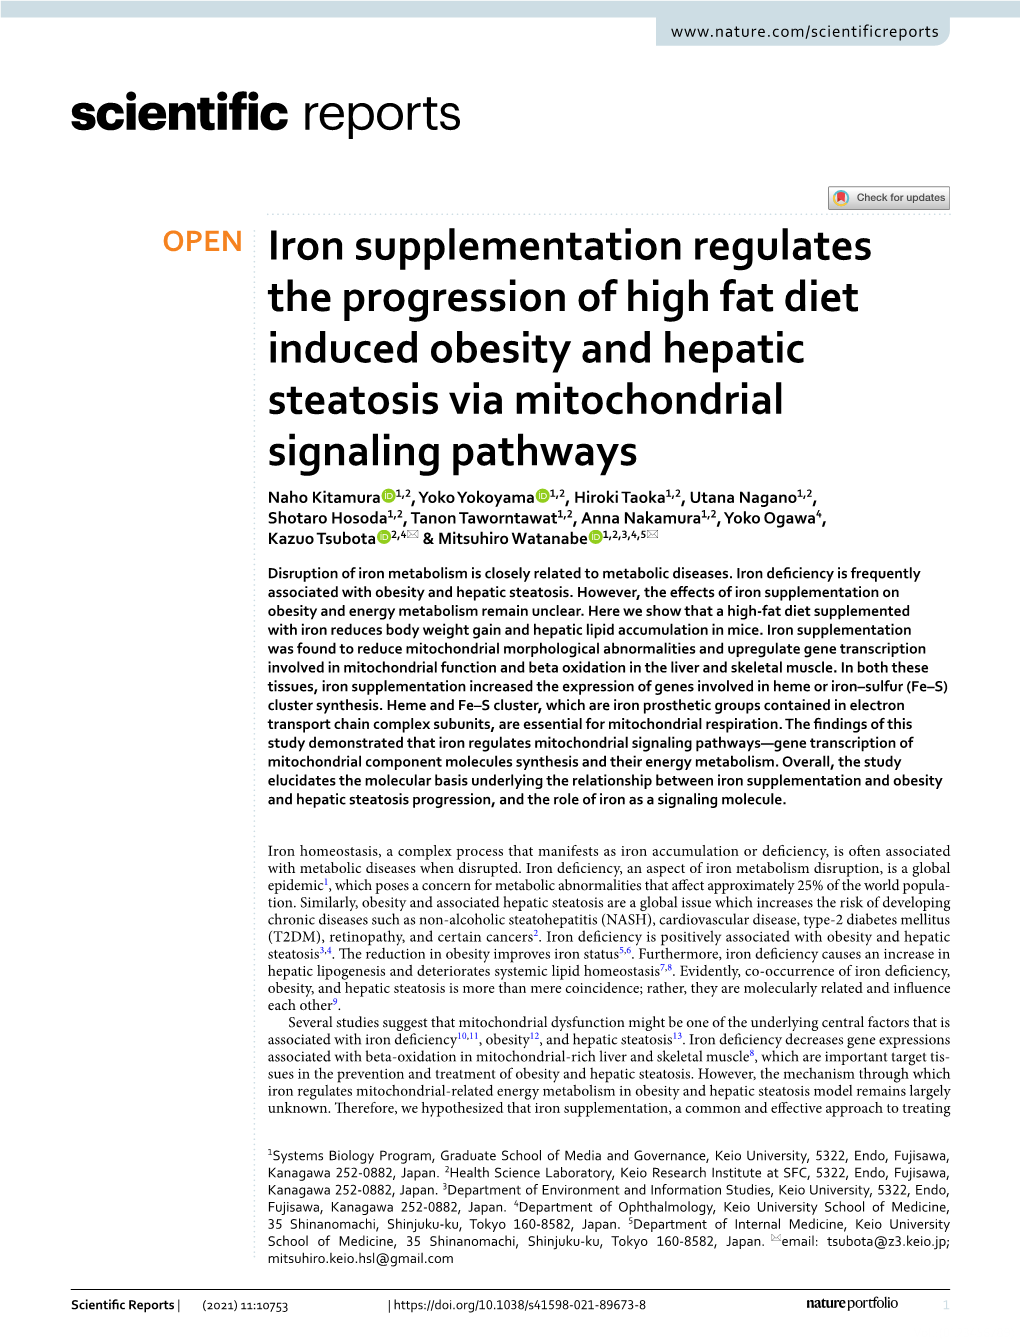 Iron Supplementation Regulates the Progression of High Fat Diet Induced